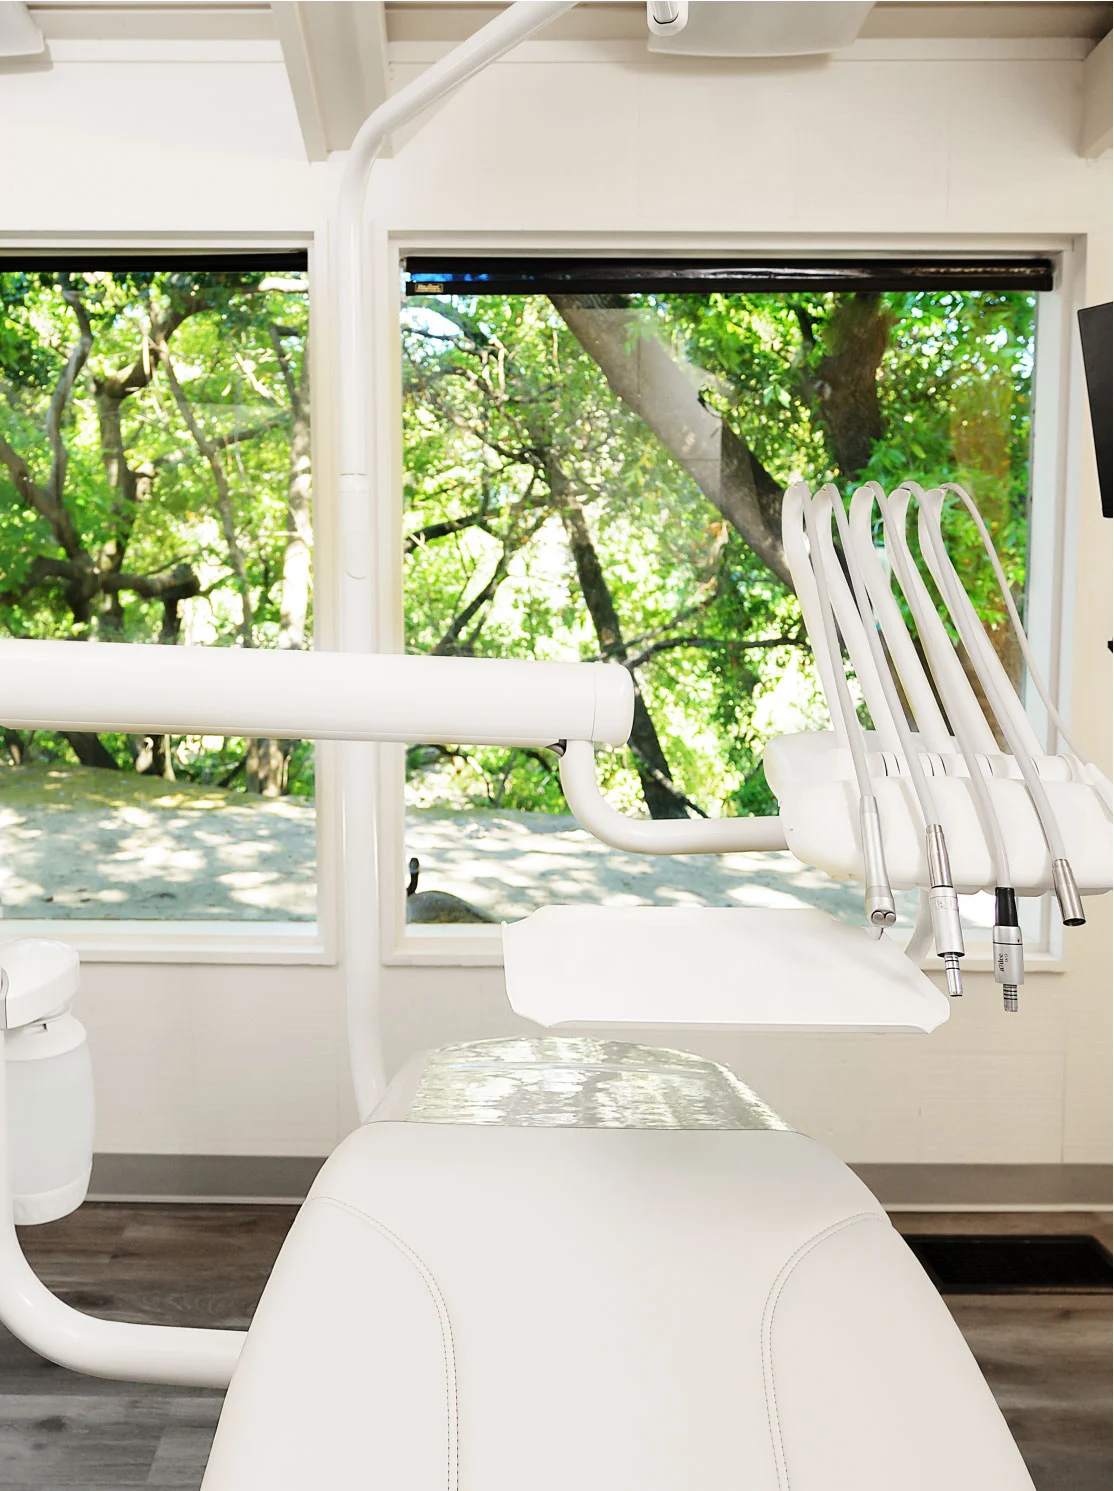 Patients have a fantastic view from the dental chair: sunlight-filled windows overlooking trees and nature